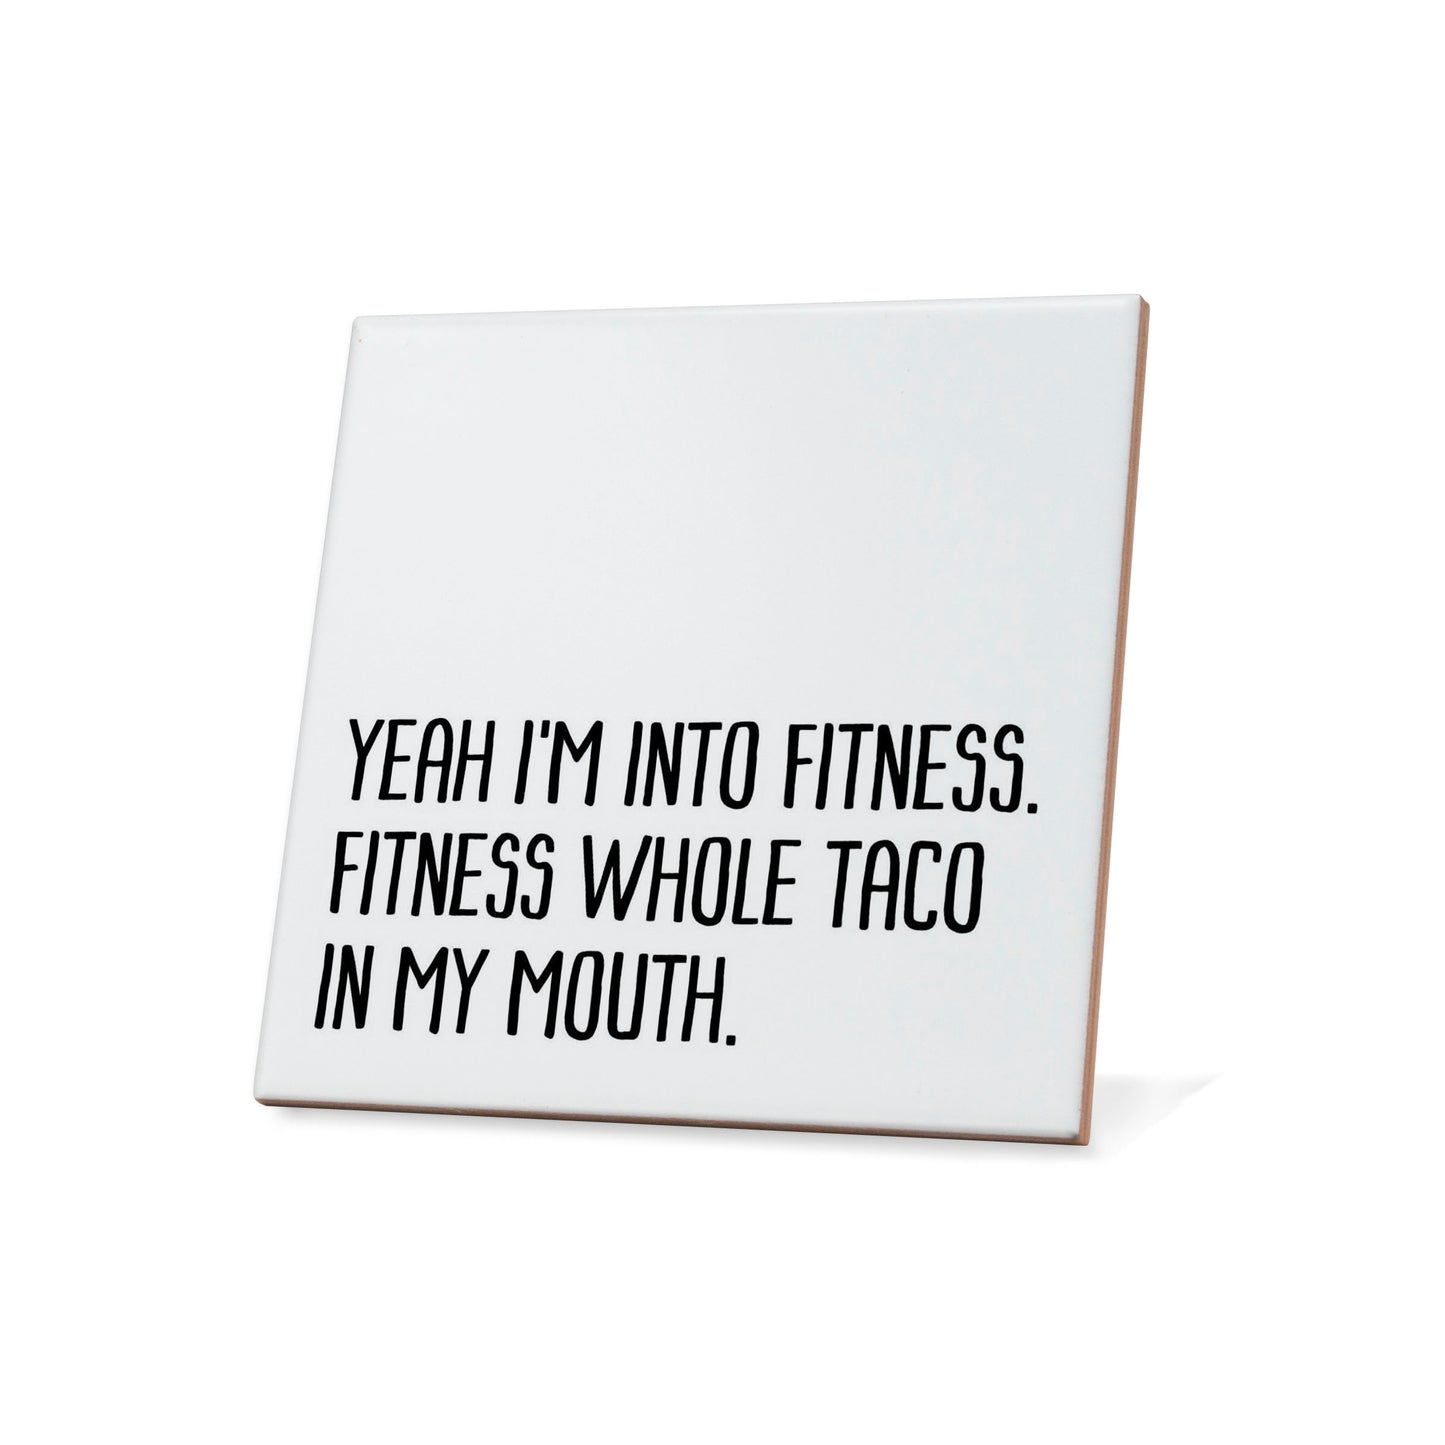 Yeah I'm into fitness. Fitness whole taco in my mouth. Quote Coaster